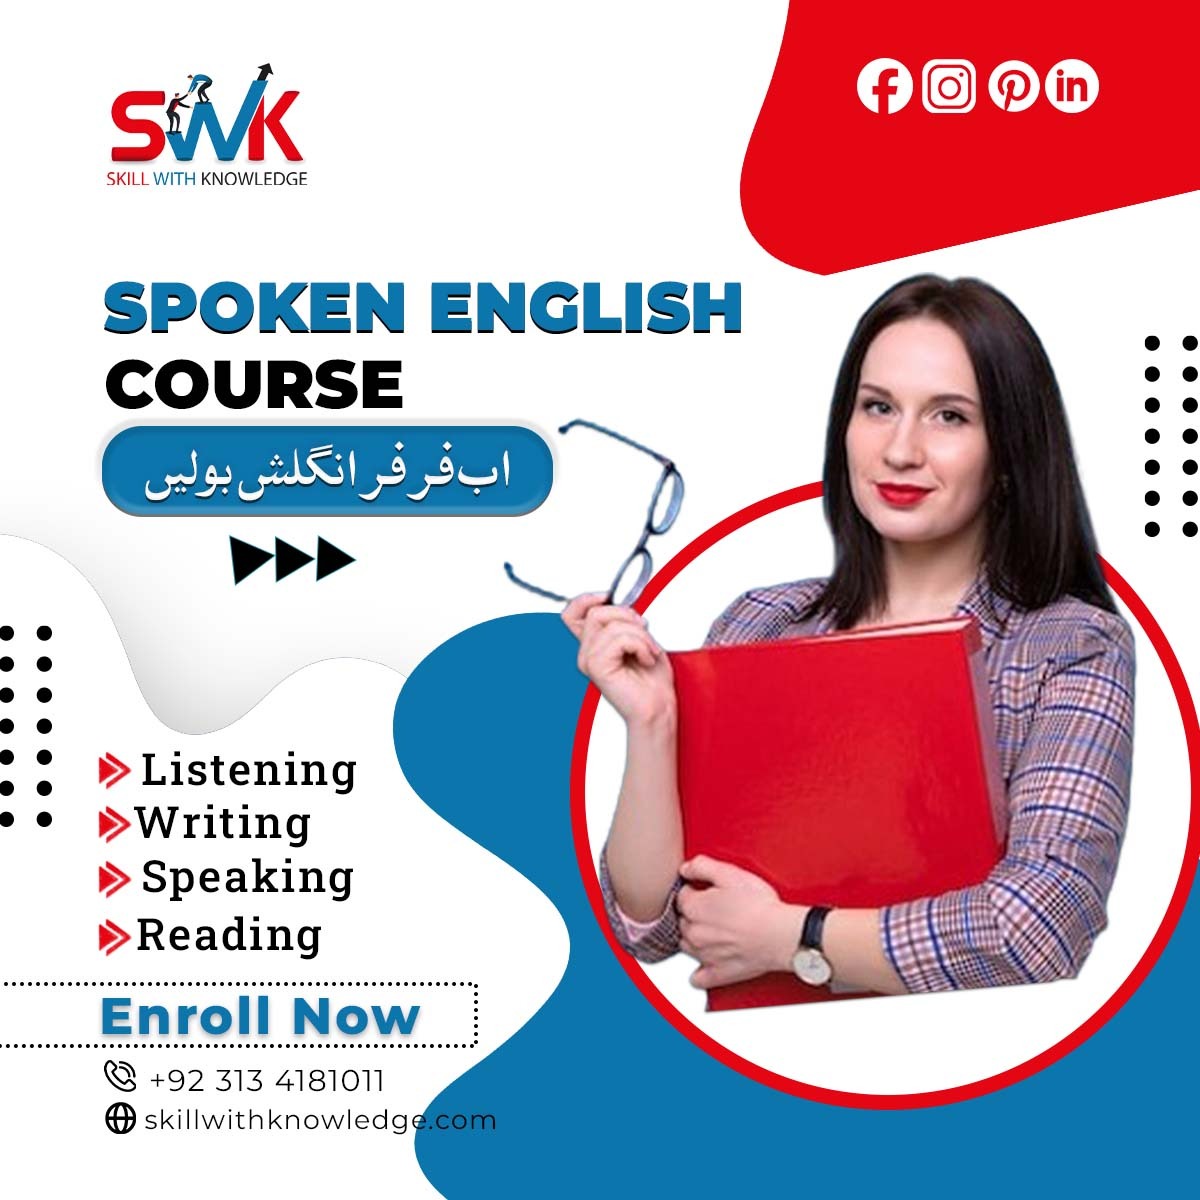 Enhance your English skills with our comprehensive Spoken English Course covering Listening Writing Speaking and Reading.
#EnglishLanguage #LanguageLearning #joinswk #swkinstitute #swk #joinswkcourses #EnglishCourse #ListeningSkills #WritingSkills #SpeakingSkills #ReadingSkills